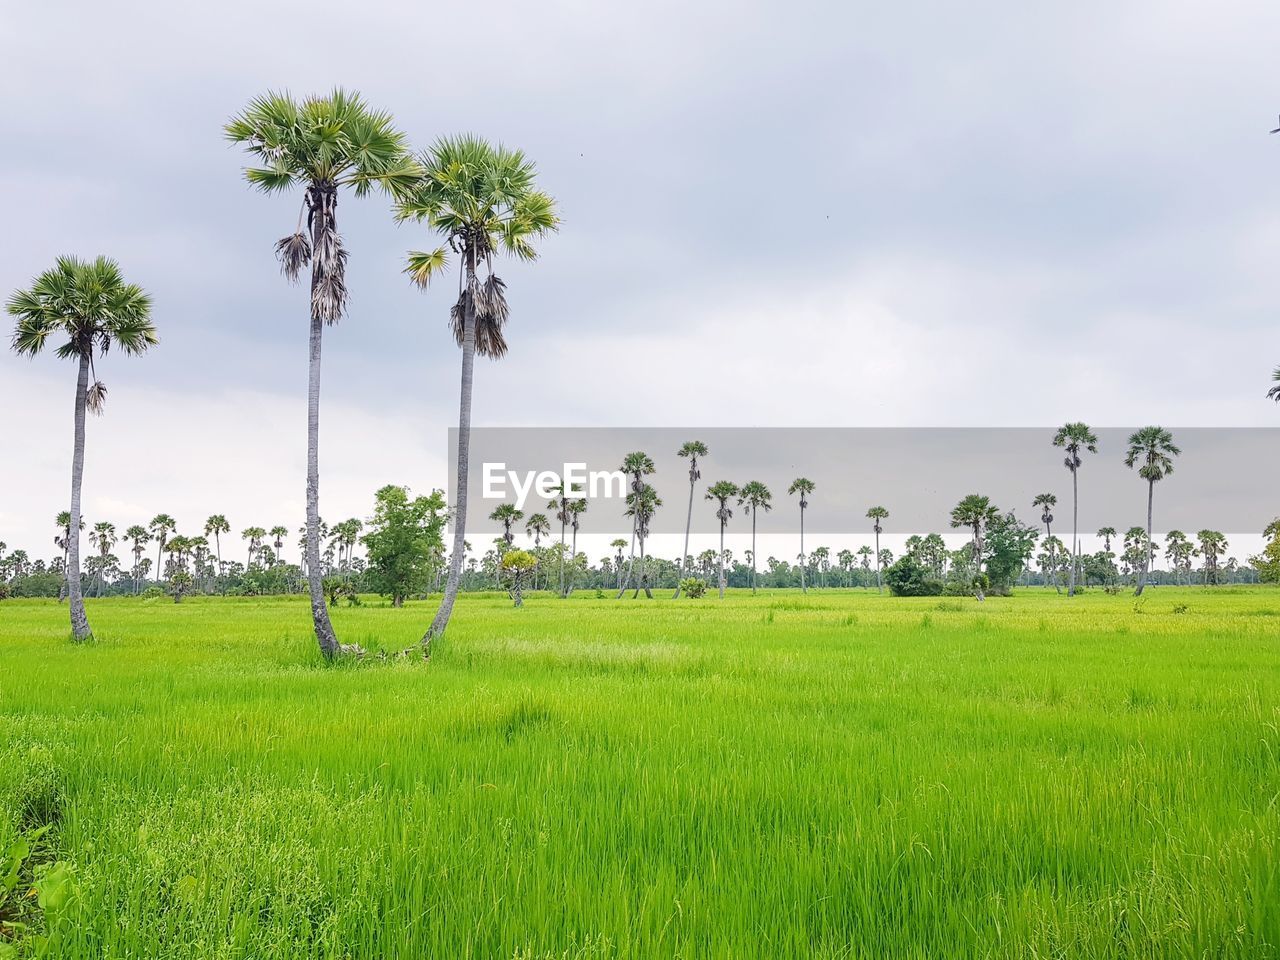 SCENIC VIEW OF PALM TREES ON FIELD